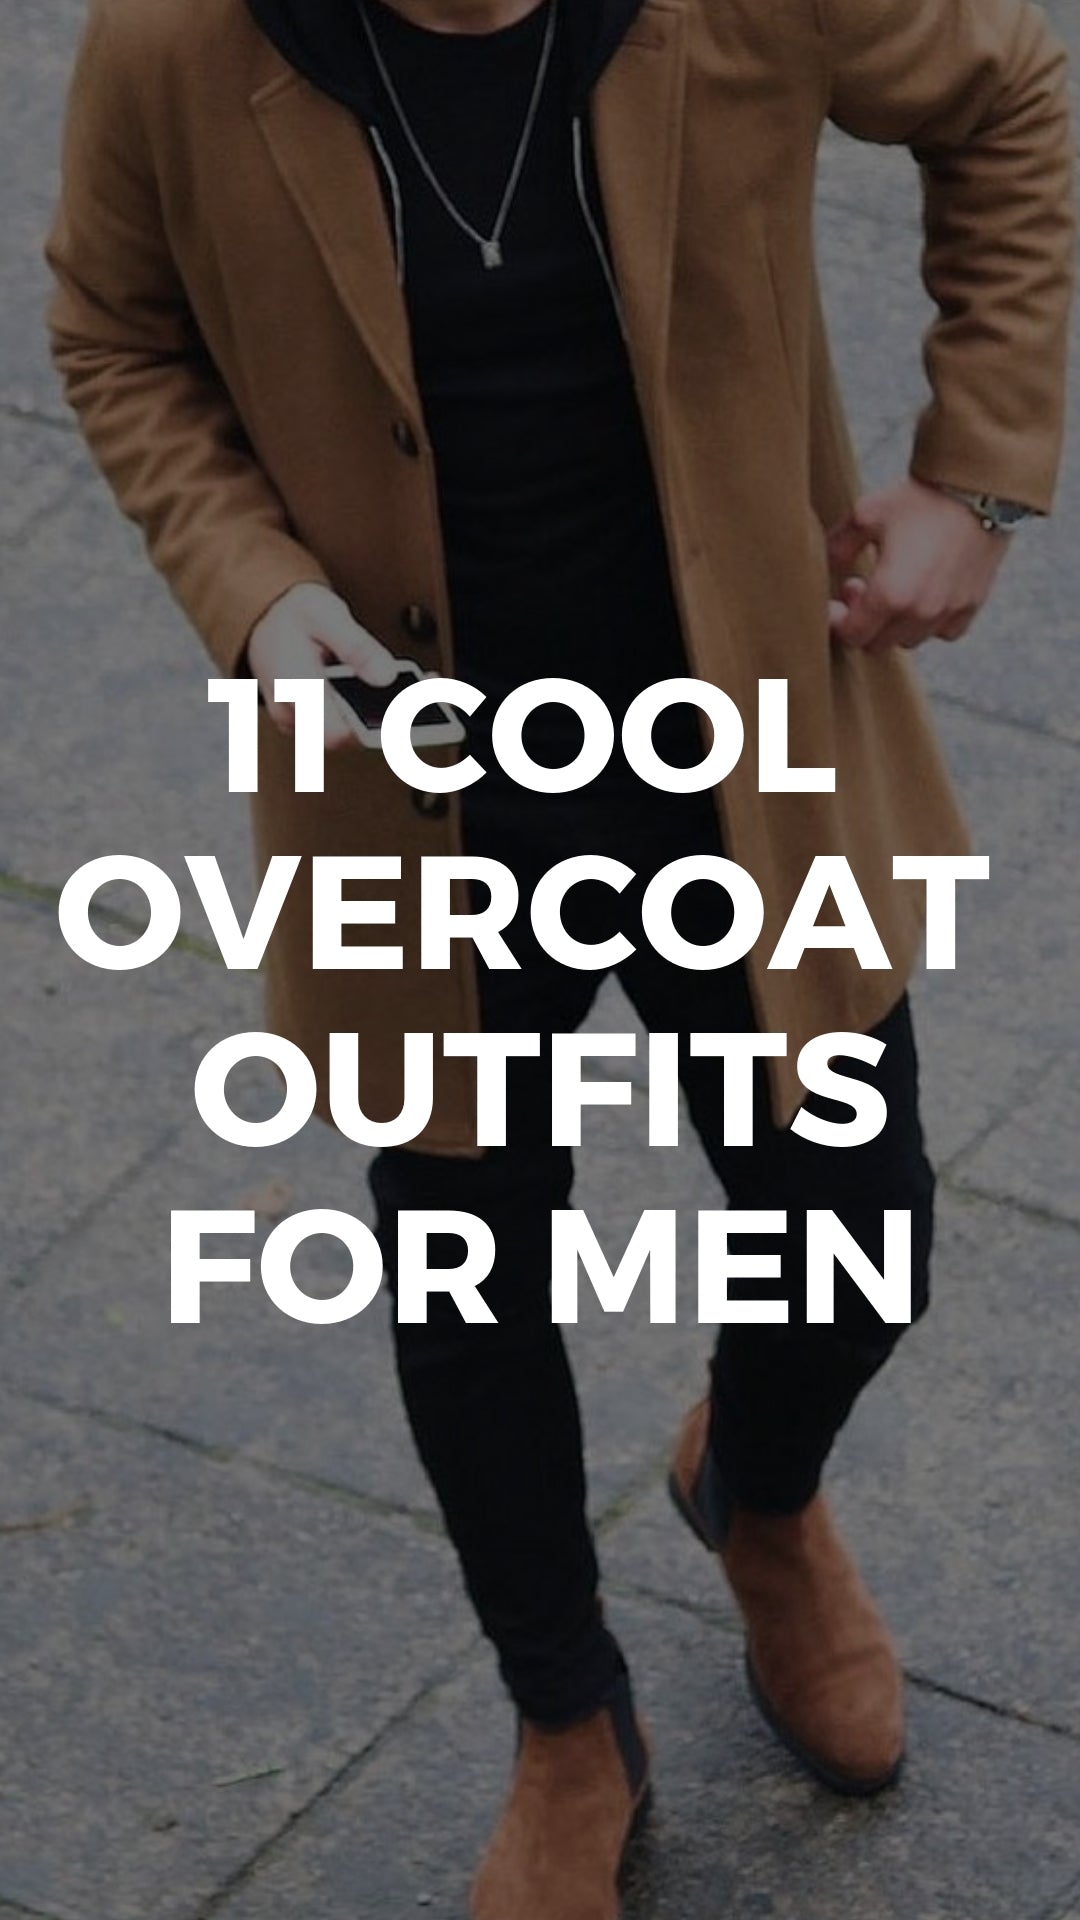 Overcoat outfits for men #street #style #overcoat #mens #fashion 